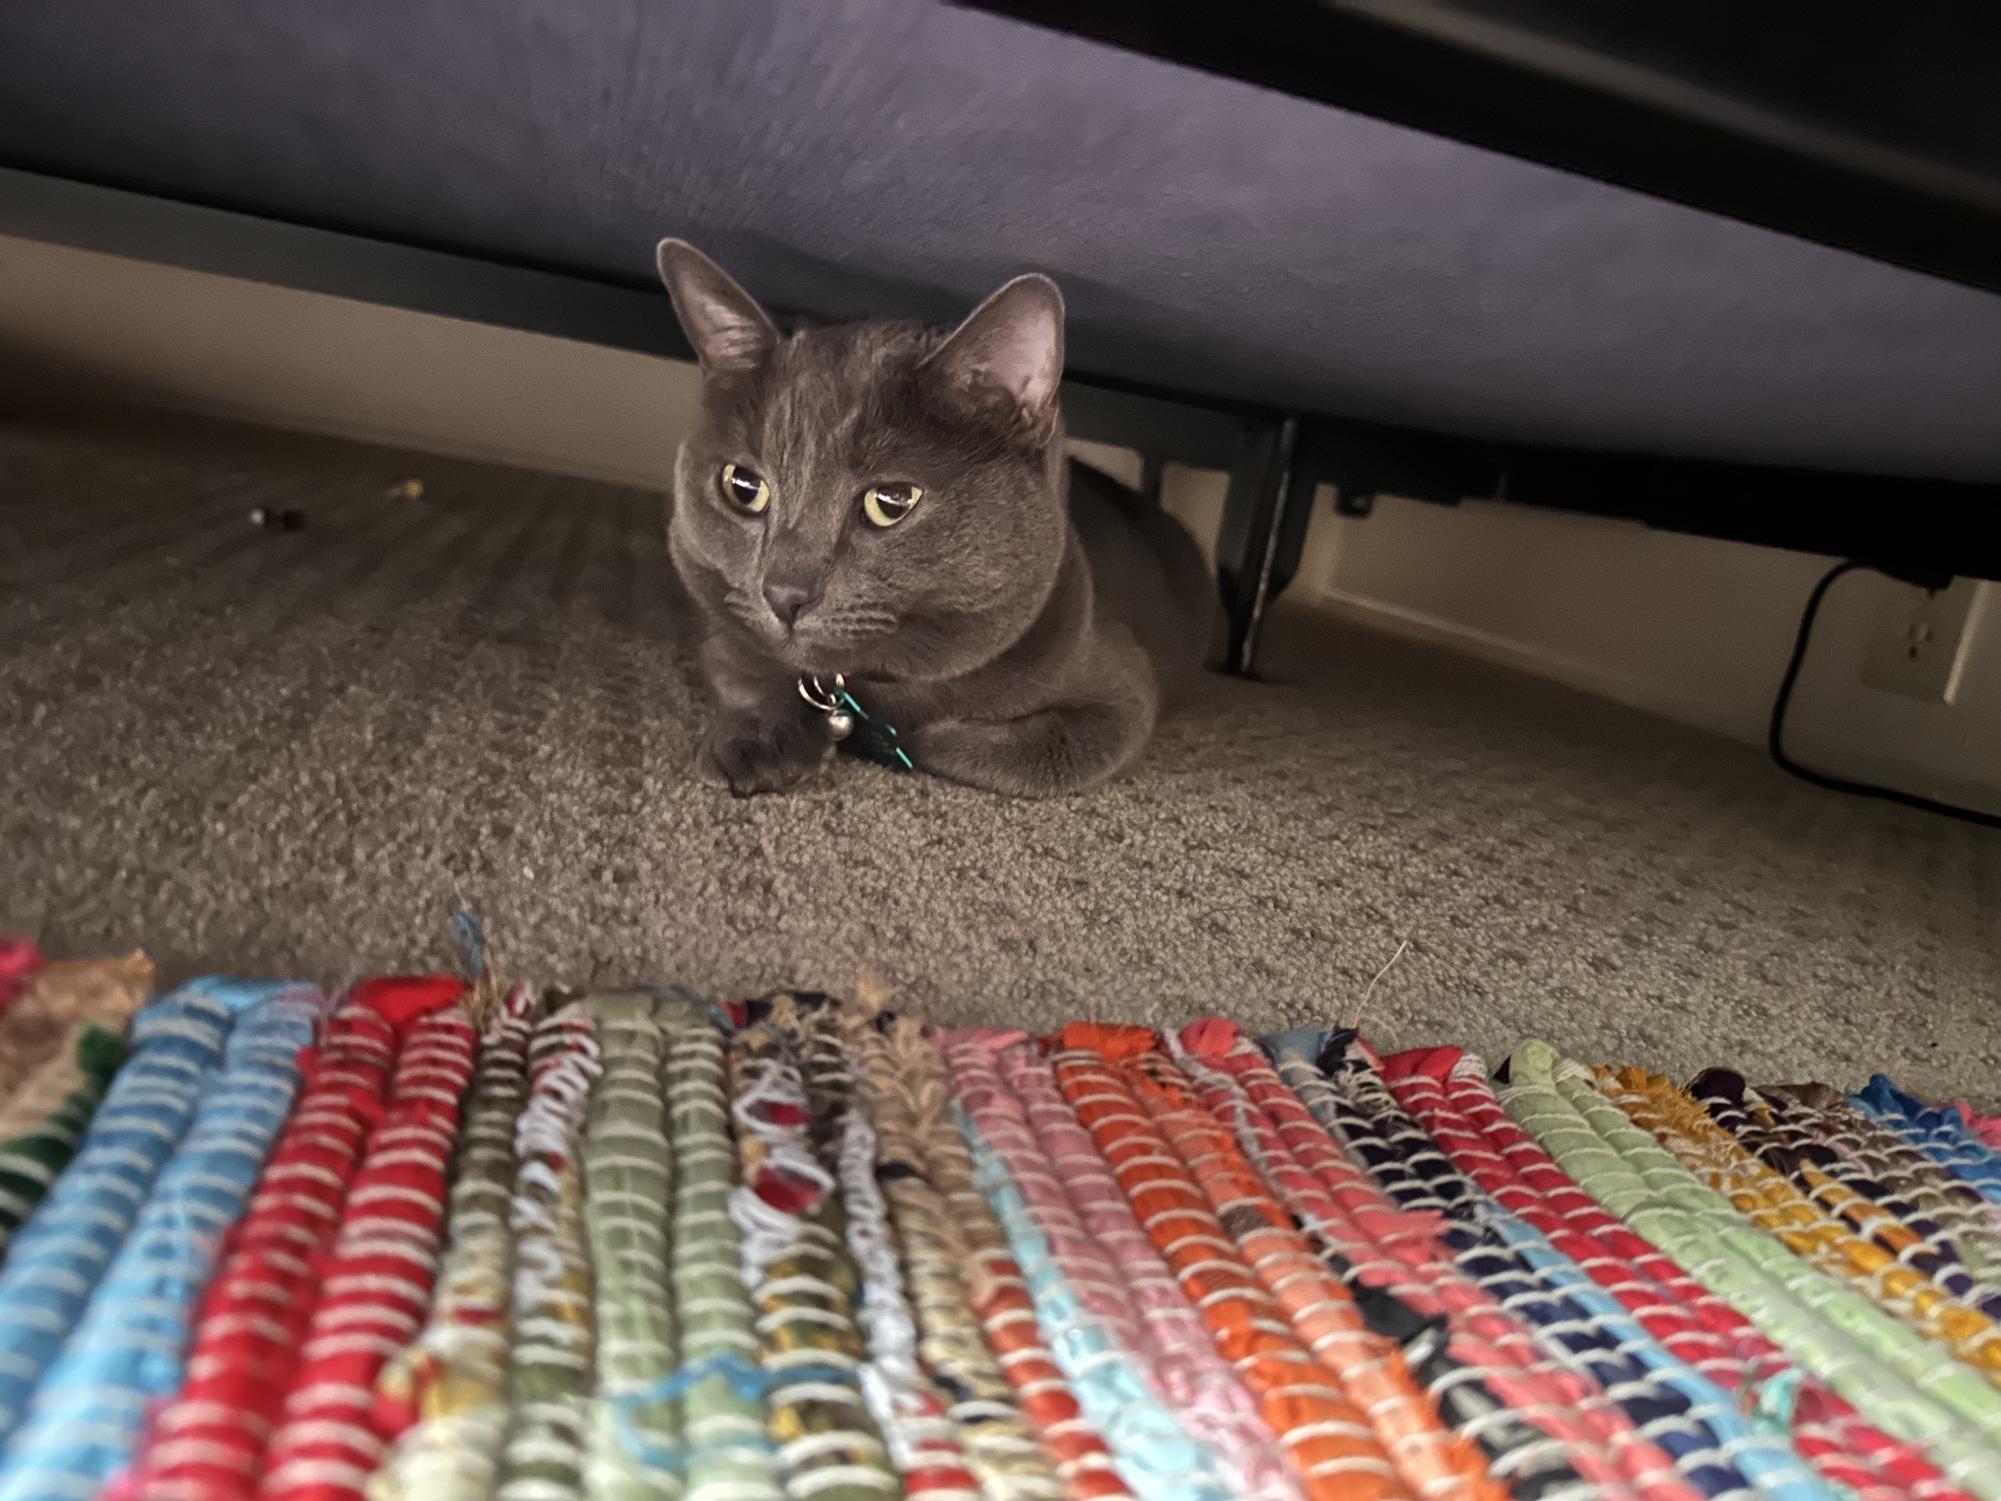 MeowMeow hides under my bed, fearing BMO’s attack.